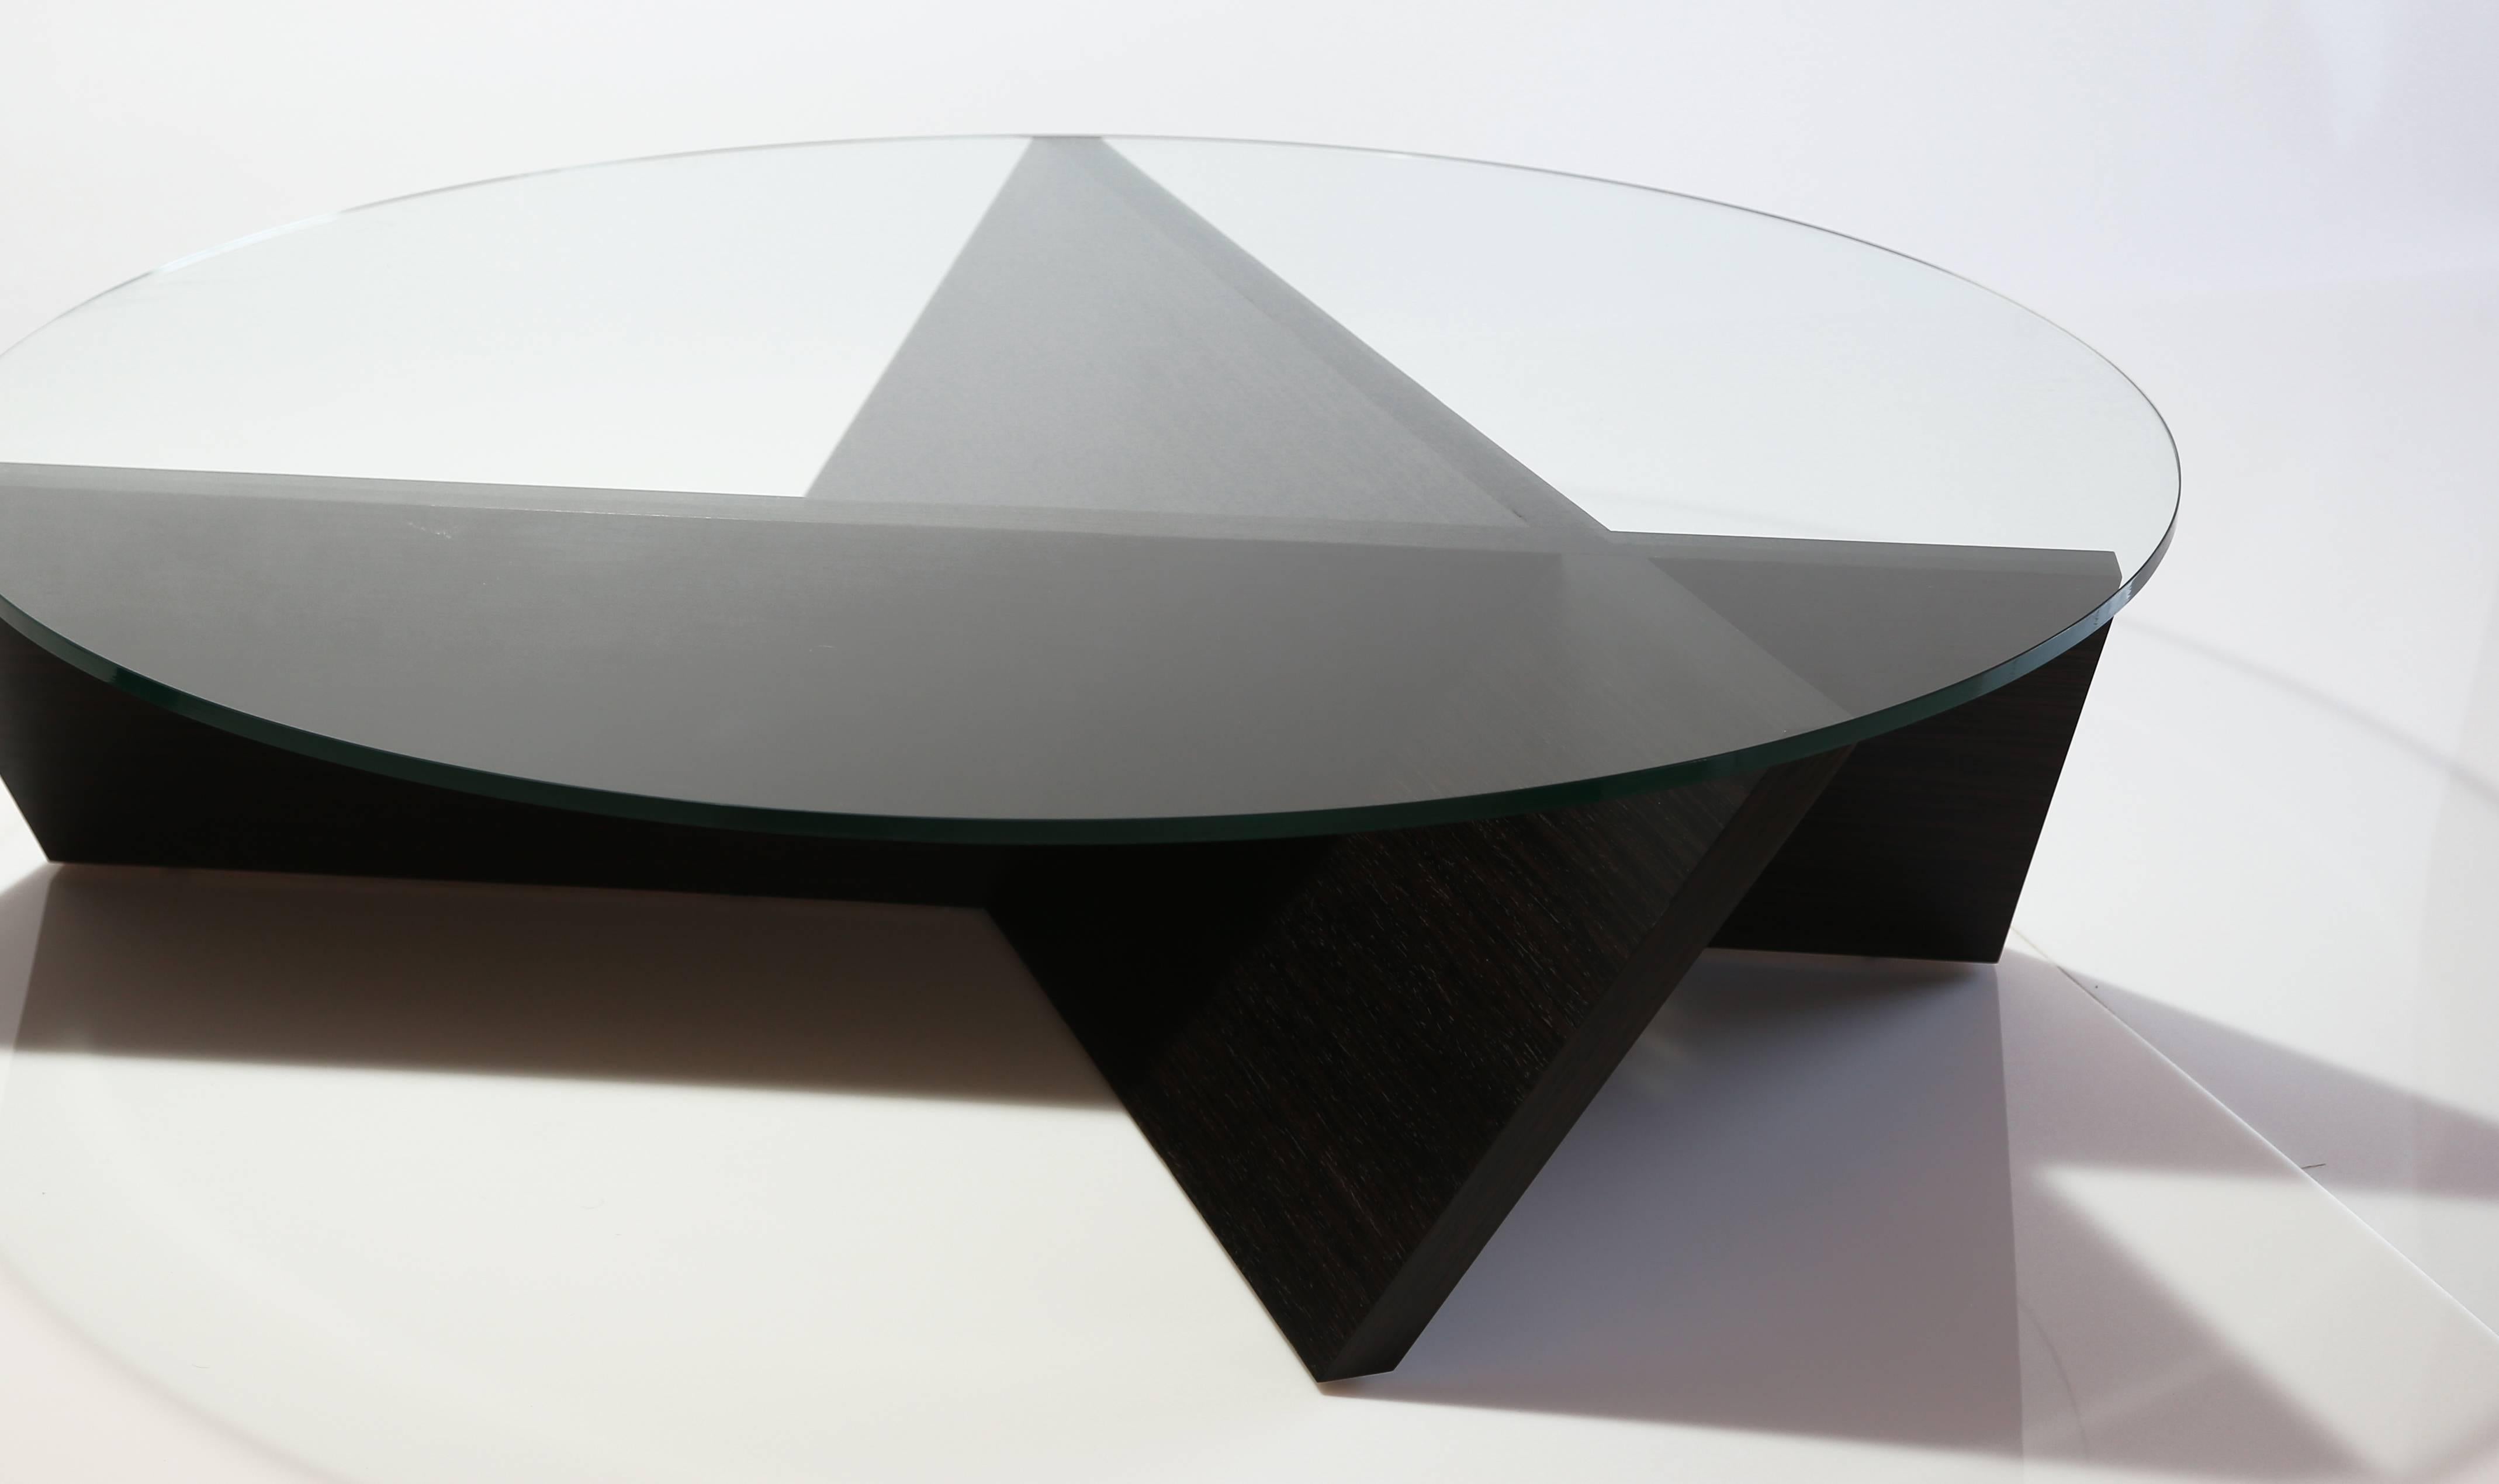 Table shown in American Chestnut with 3/8 inch glass.
William Earle works alone in his Northern California studio,
Making every table to order.
Custom dimensions and finishes are welcome.